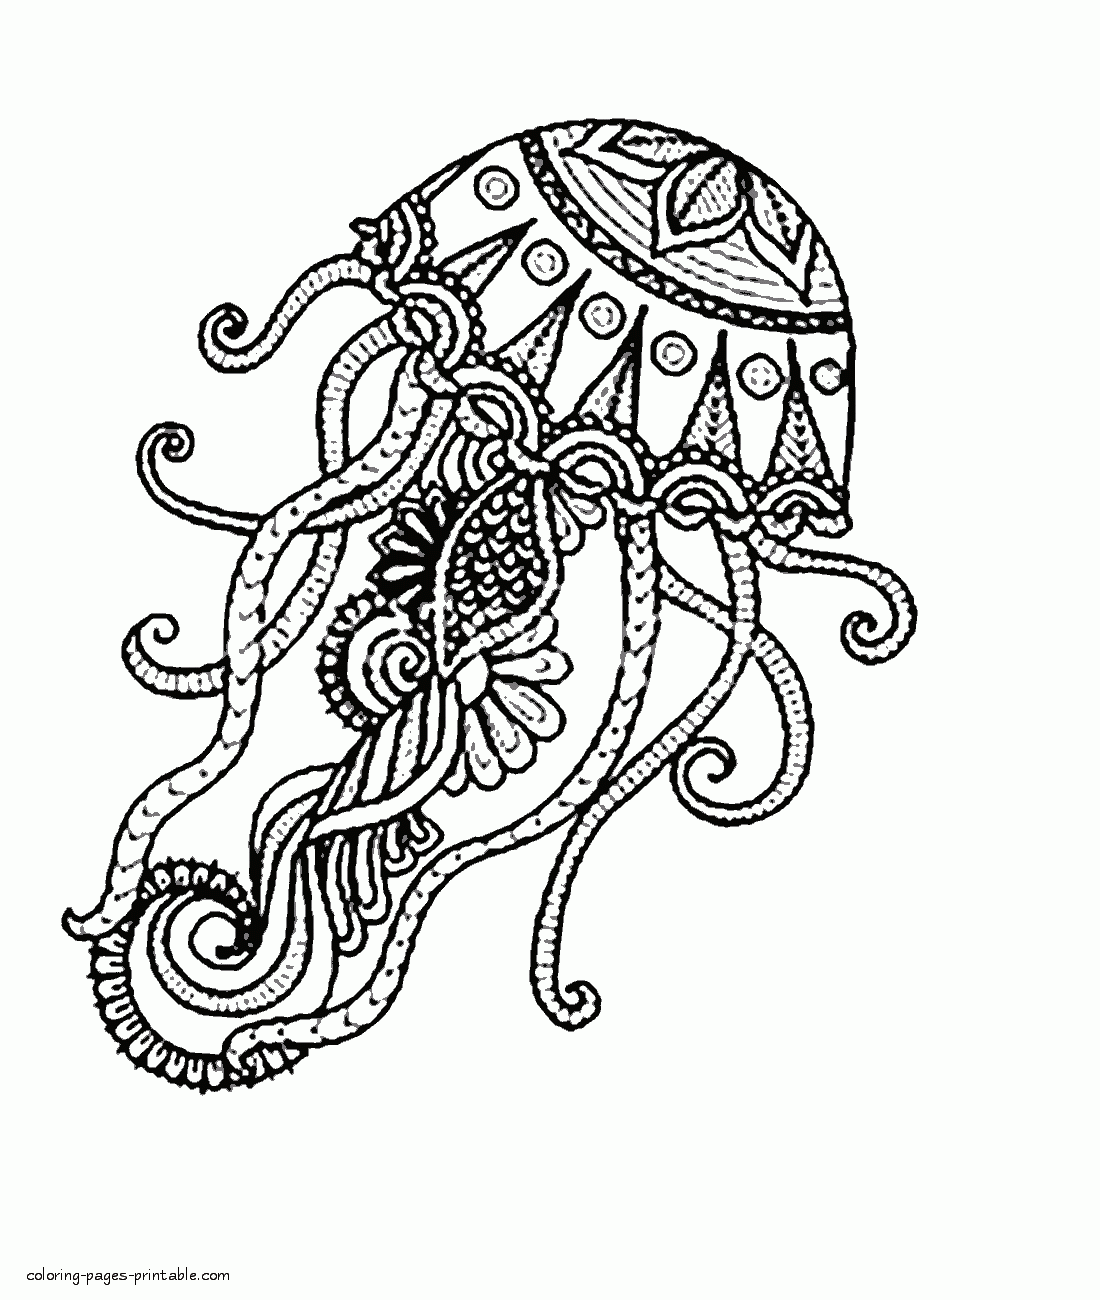 Jellyfish Adult Coloring Page || COLORING-PAGES-PRINTABLE.COM